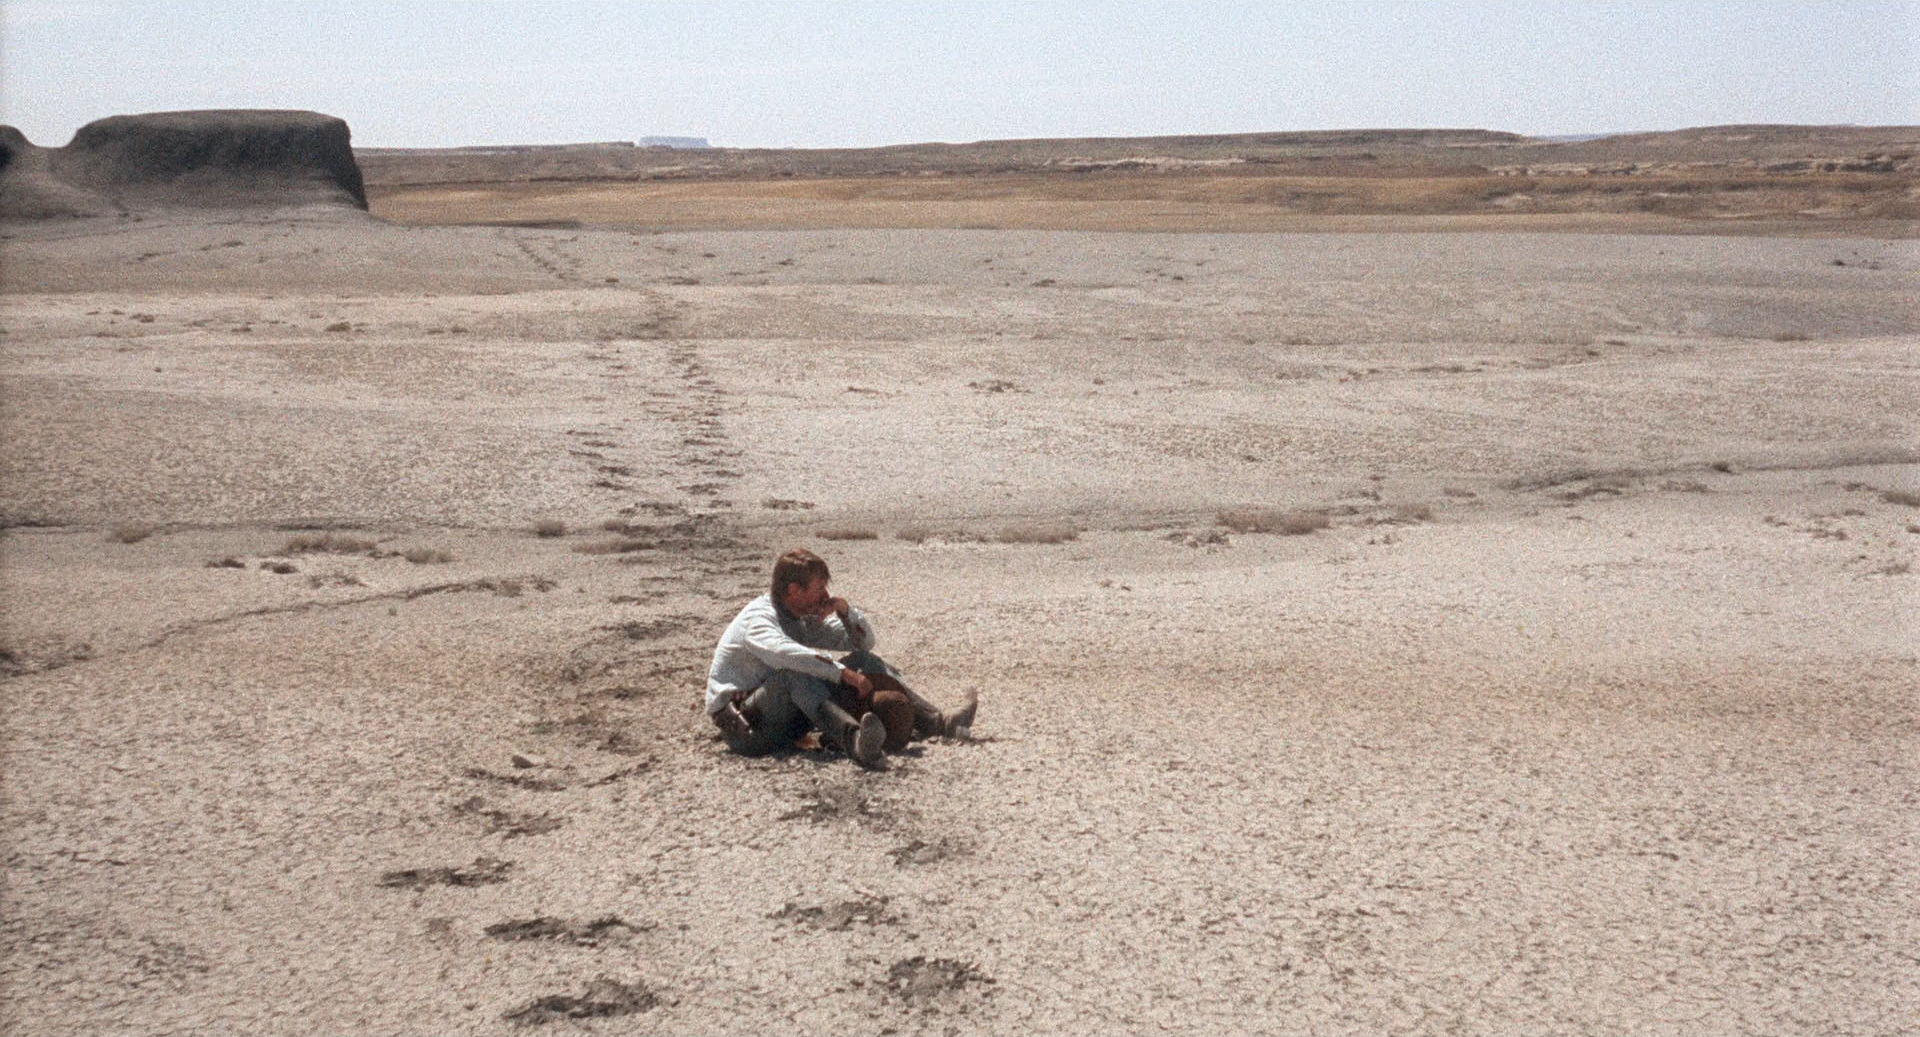 Coley Alone in the Desert